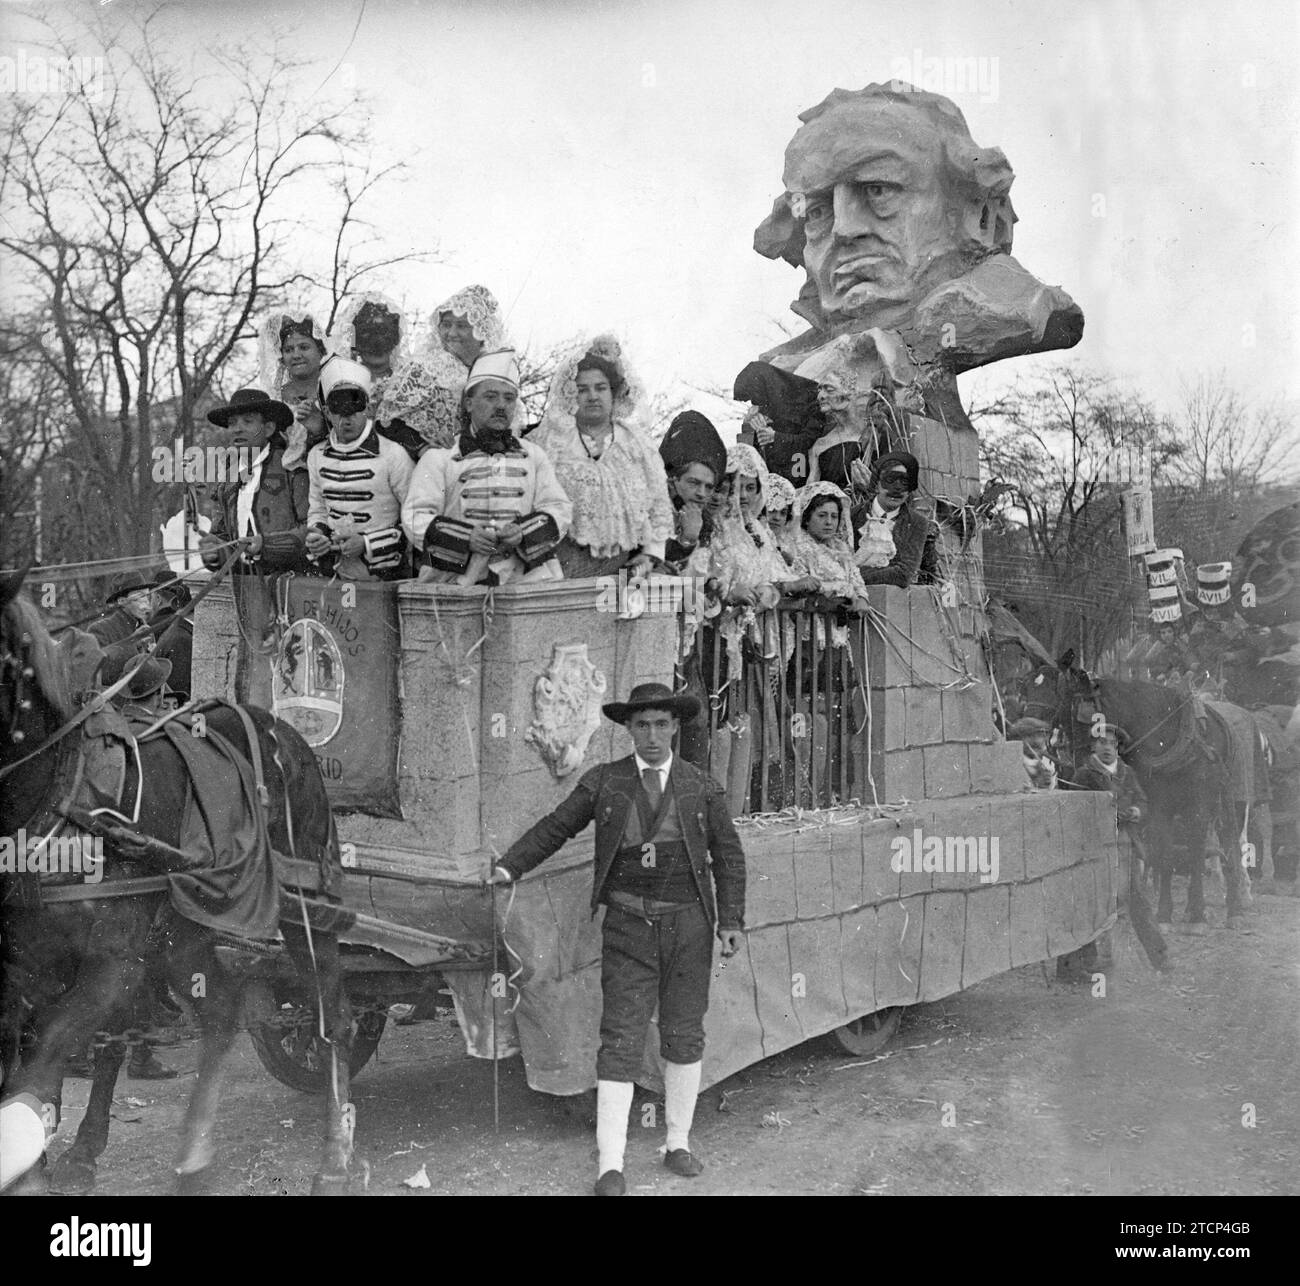 From the 1916 carnival in Madrid. 'Goya, Artistic', float presented, outside of the Competition, by the Hijos de Madrid center. Credit: Album / Archivo ABC / José Zegri Stock Photo